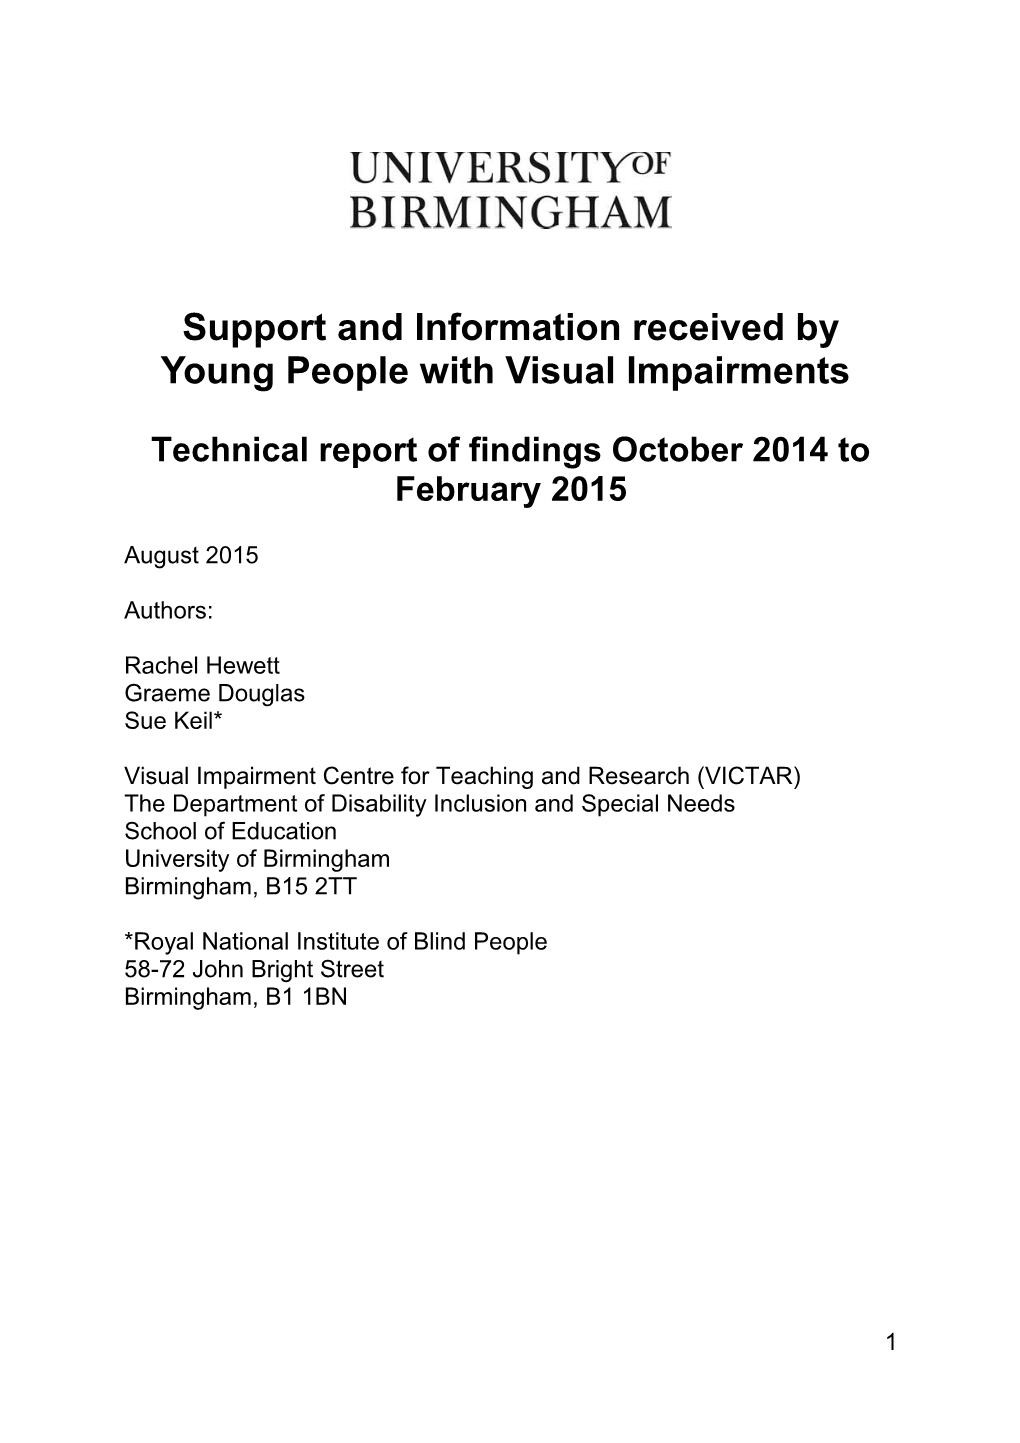 Support and Information Received by Young People with Visual Impairments